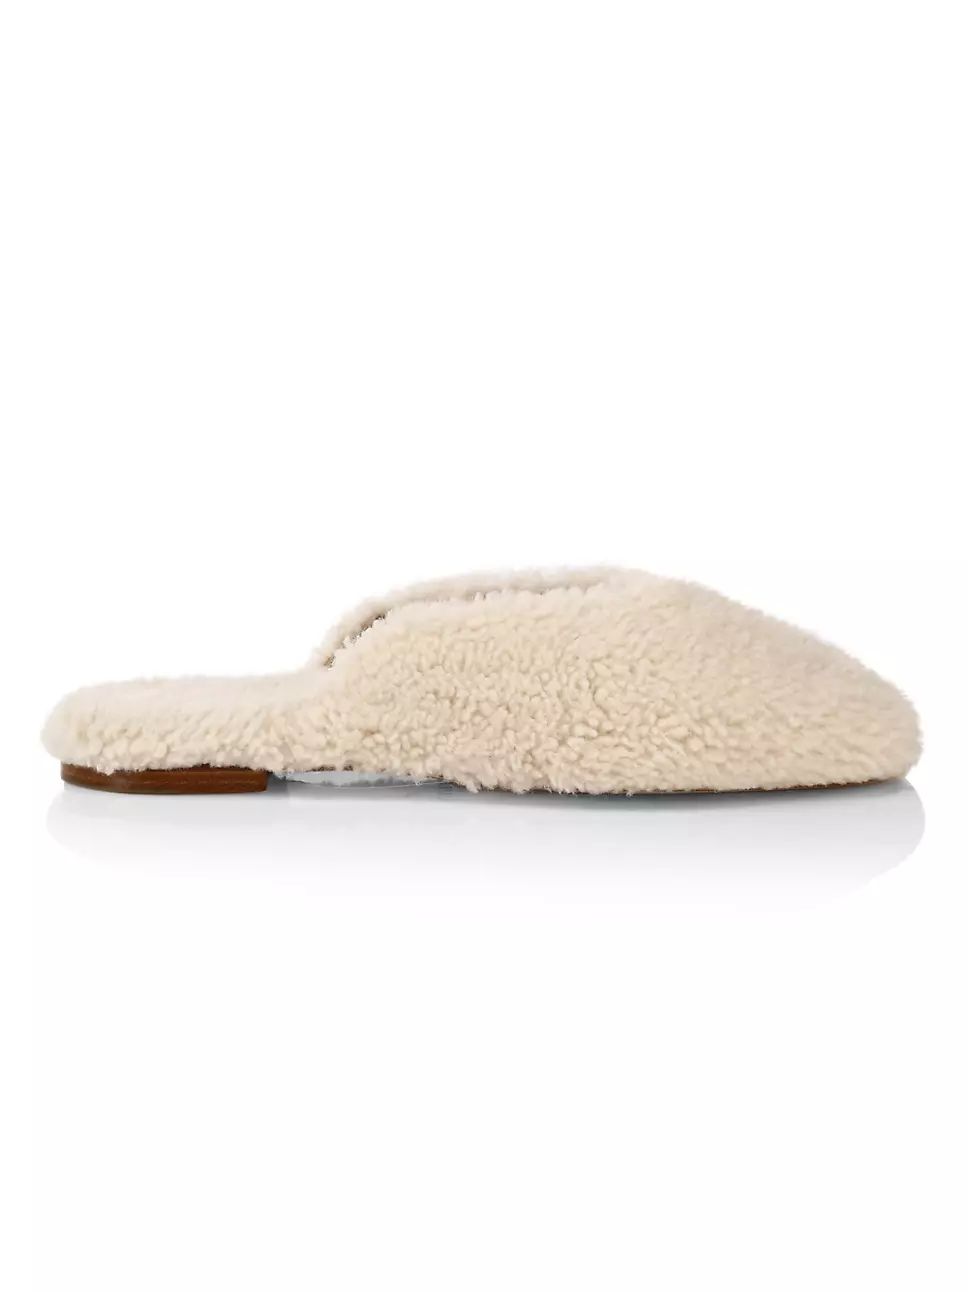 Shearling Slippers | Saks Fifth Avenue